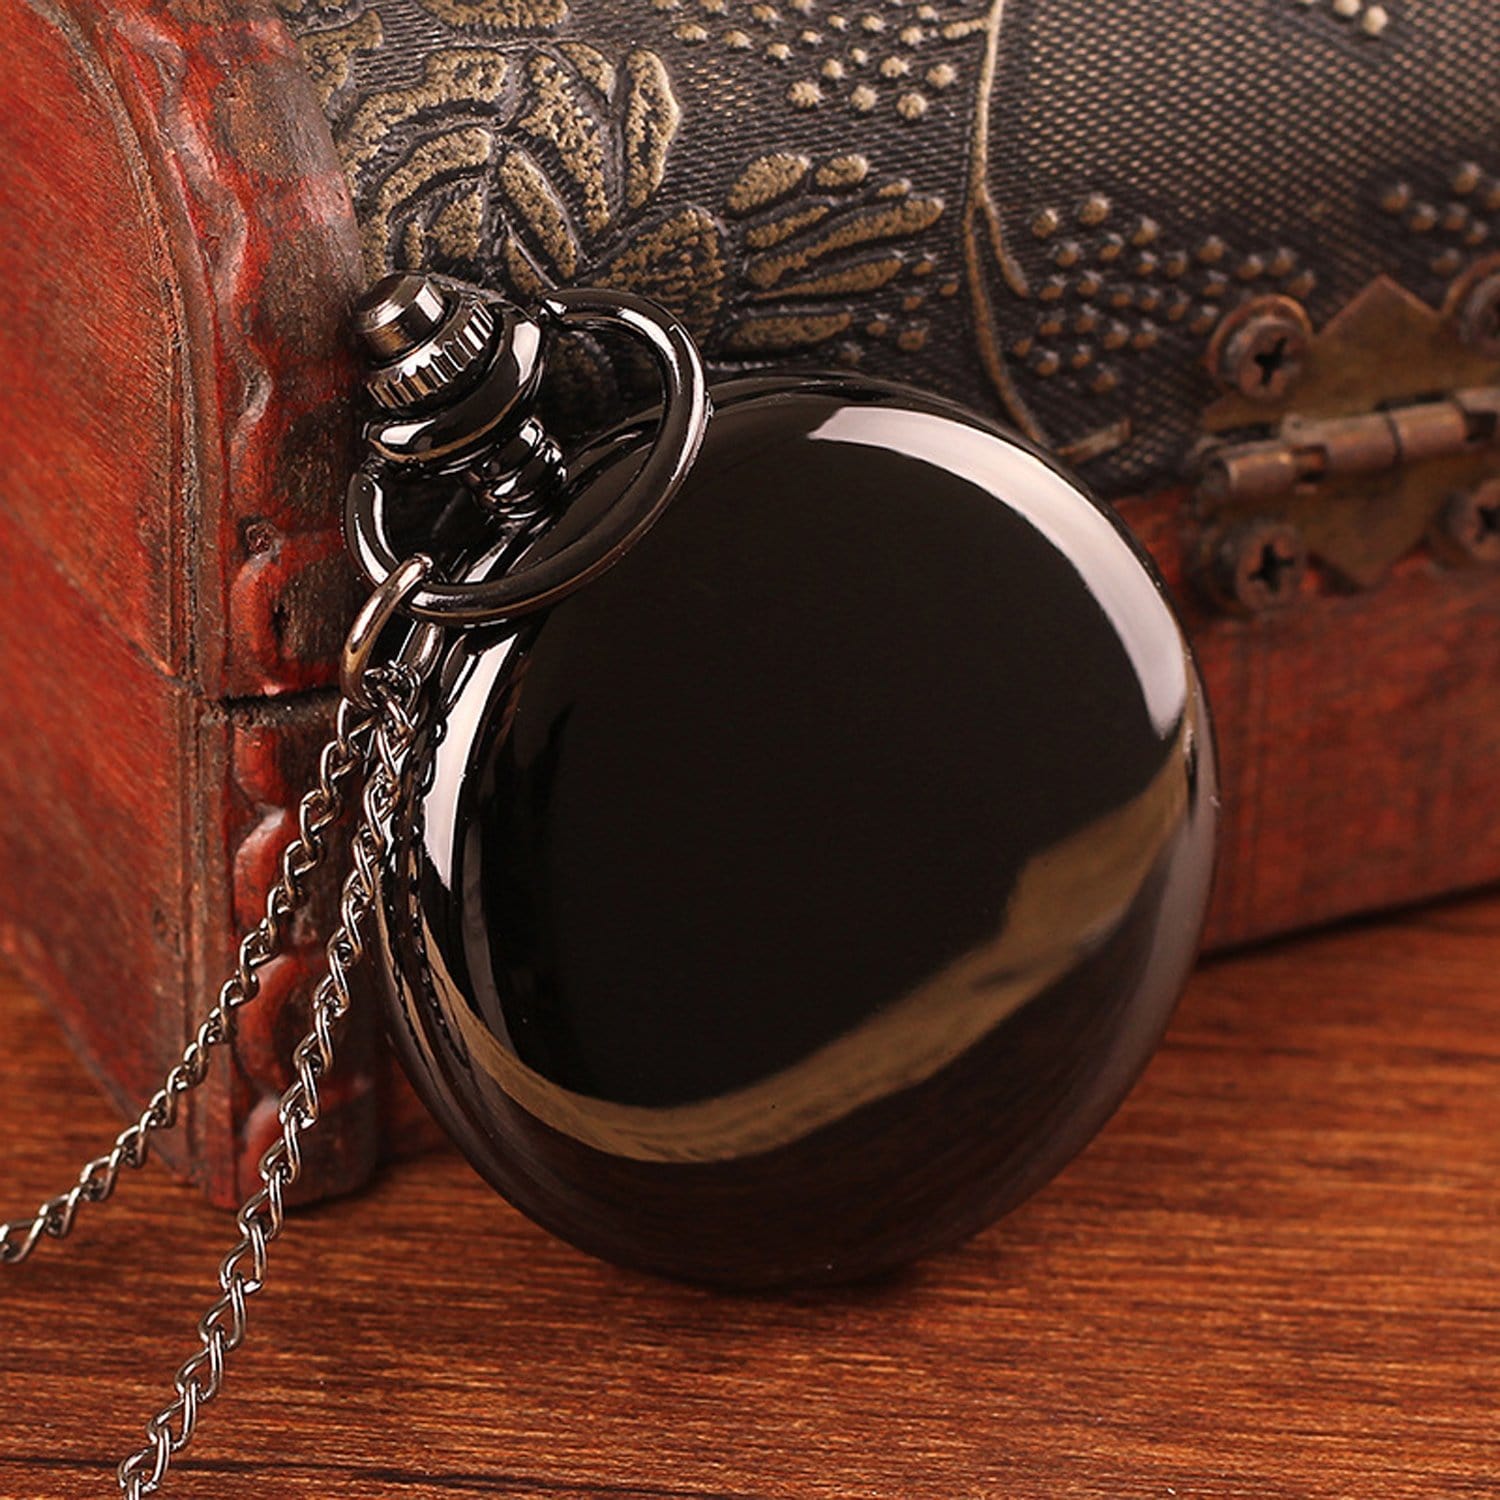 Pocket Watches To My Husband - You Are My Everything Pocket Watch GiveMe-Gifts